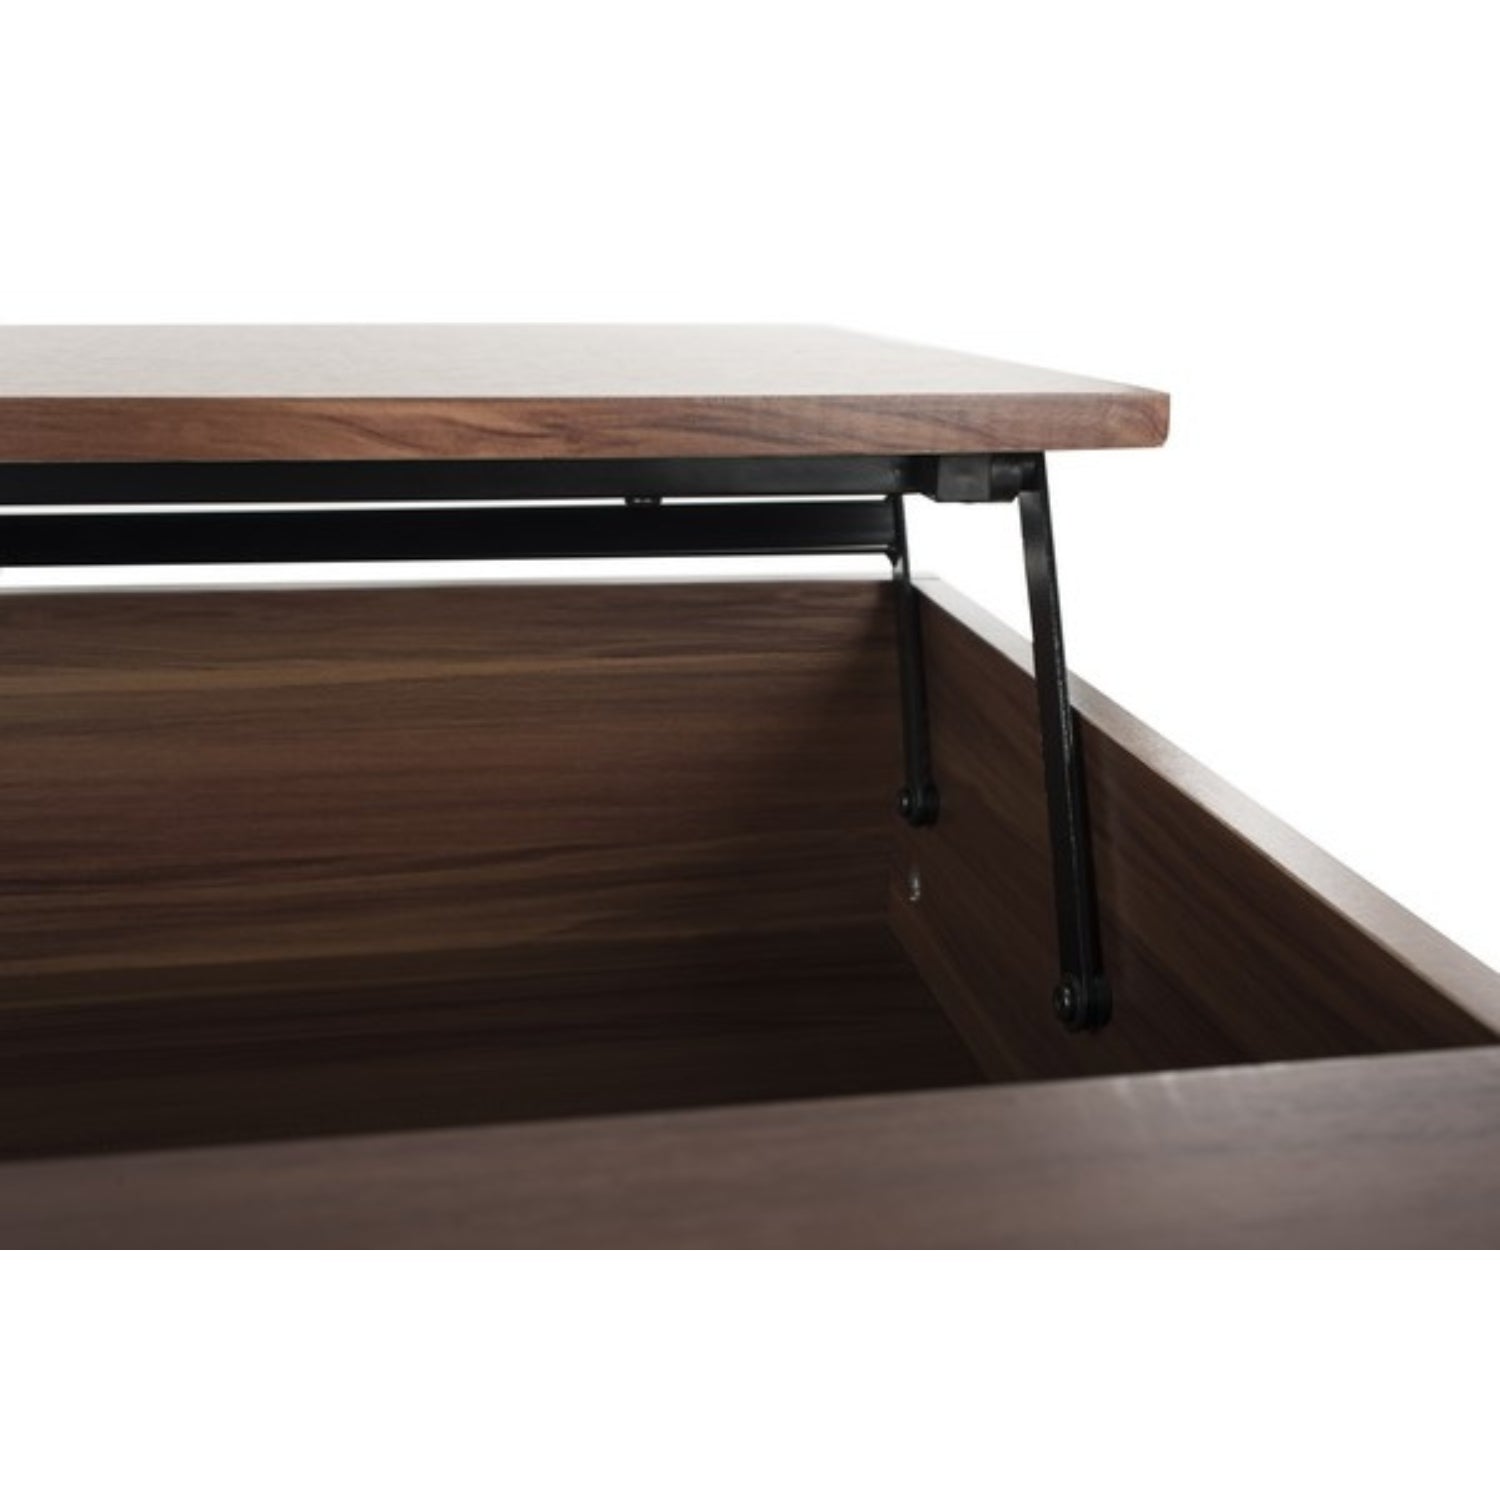 Askov Coffee Table Lift Top with wooden desk and black metal lever.